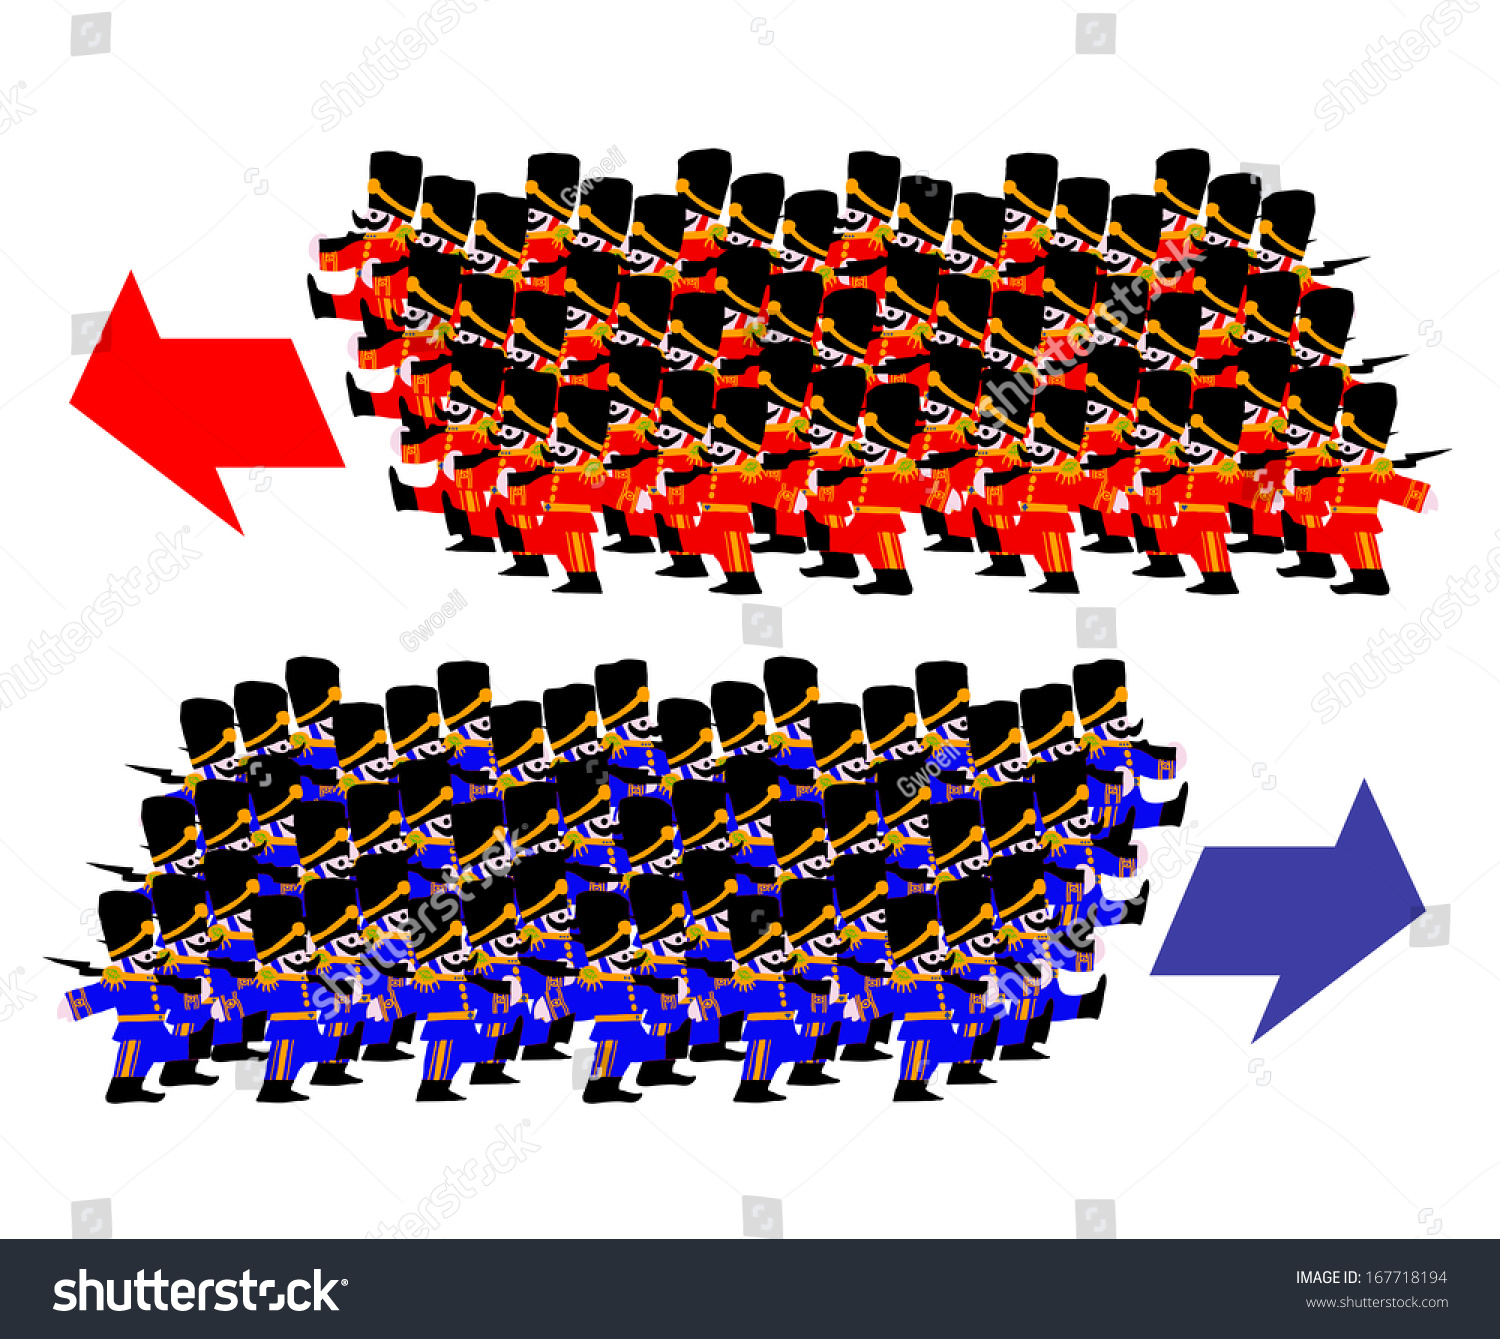 Miniature Red Blue Coat Soldiers Marching Stock Illustration